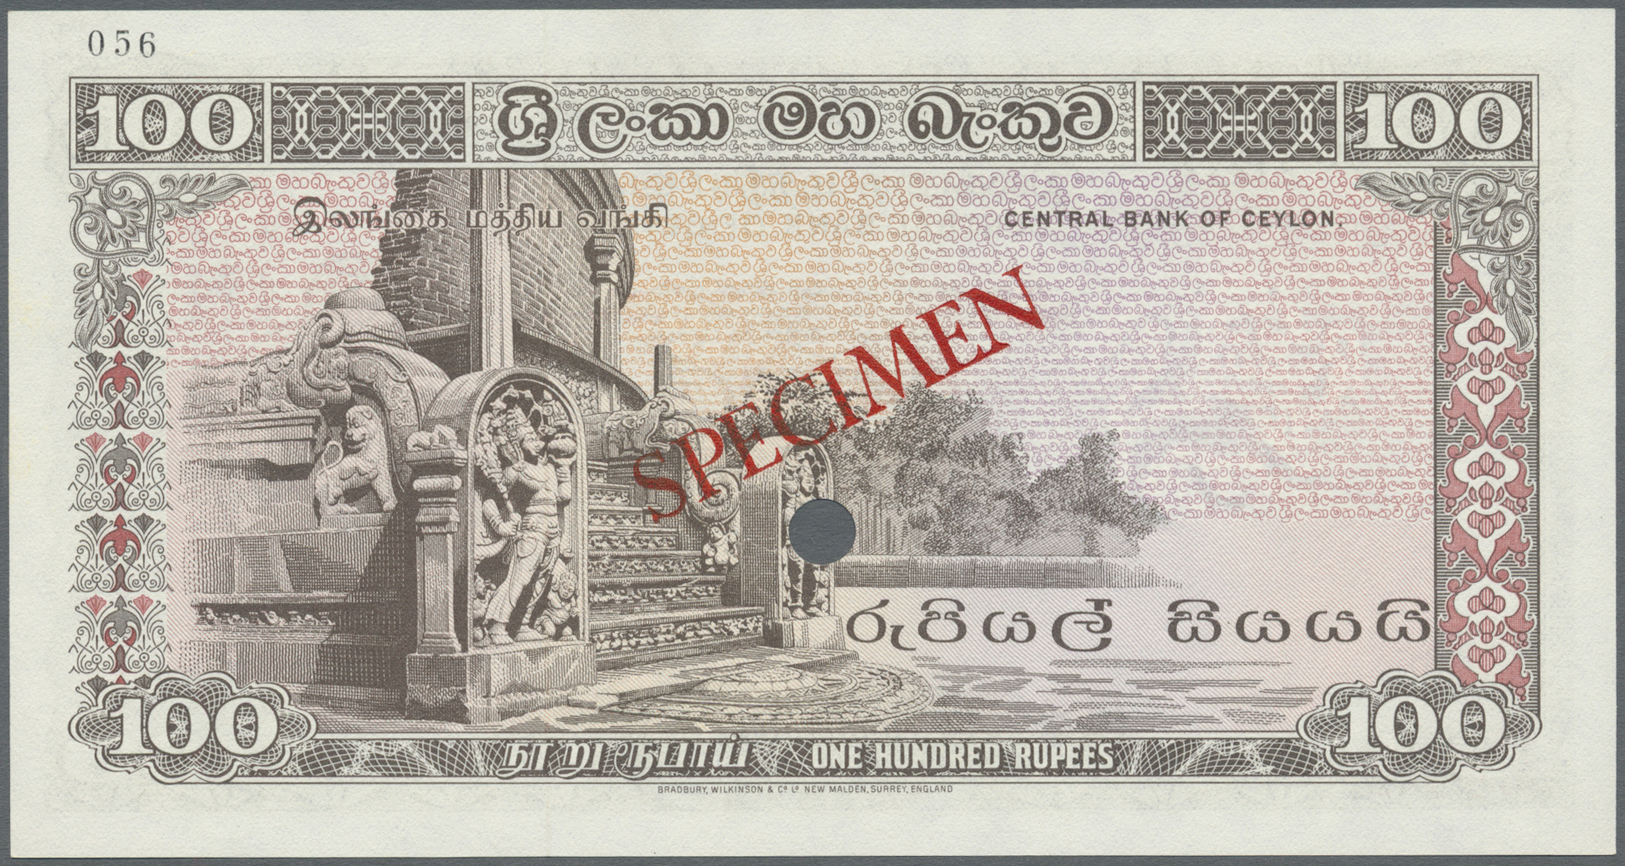 00536 Ceylon: 100 Rupees ND Proof Specimen P. 82p/s Without Signature In Condition: UNC. - Sri Lanka